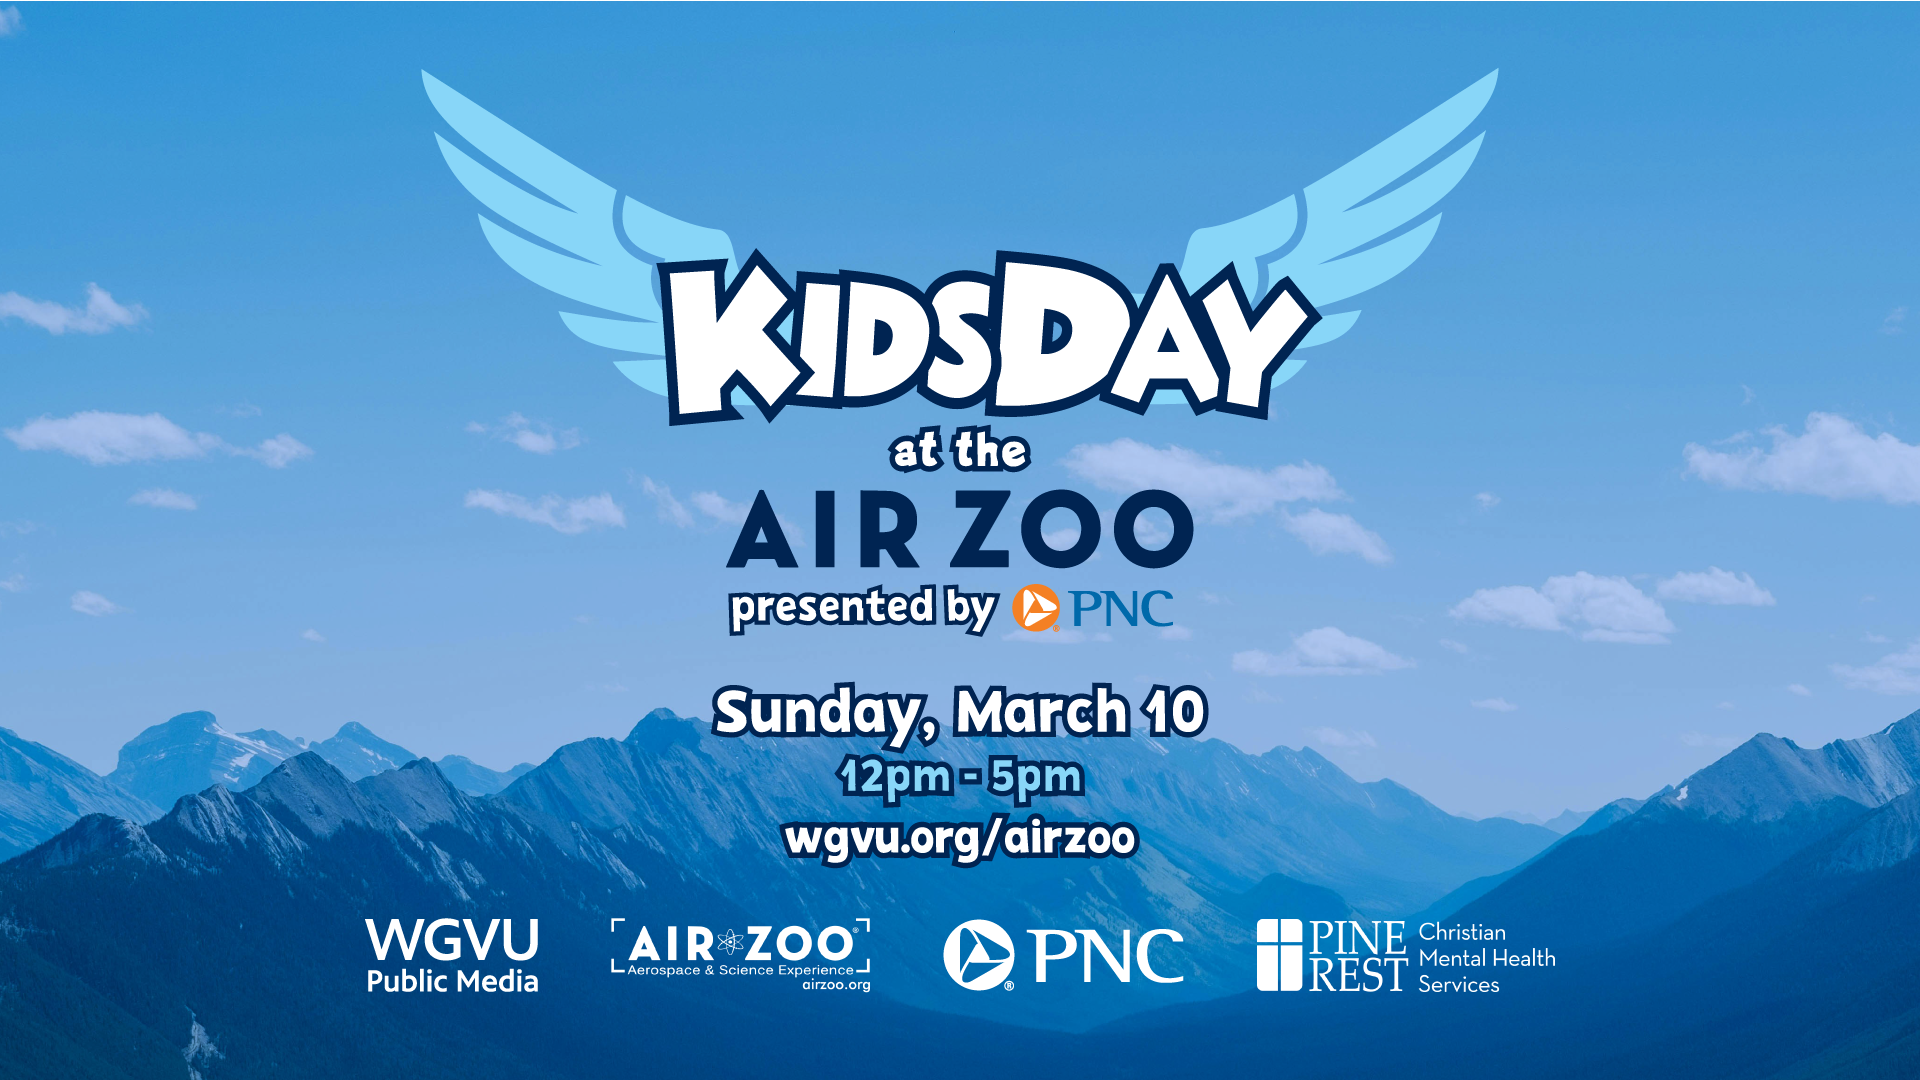 the kids day graphic with flight wings floating above moutains